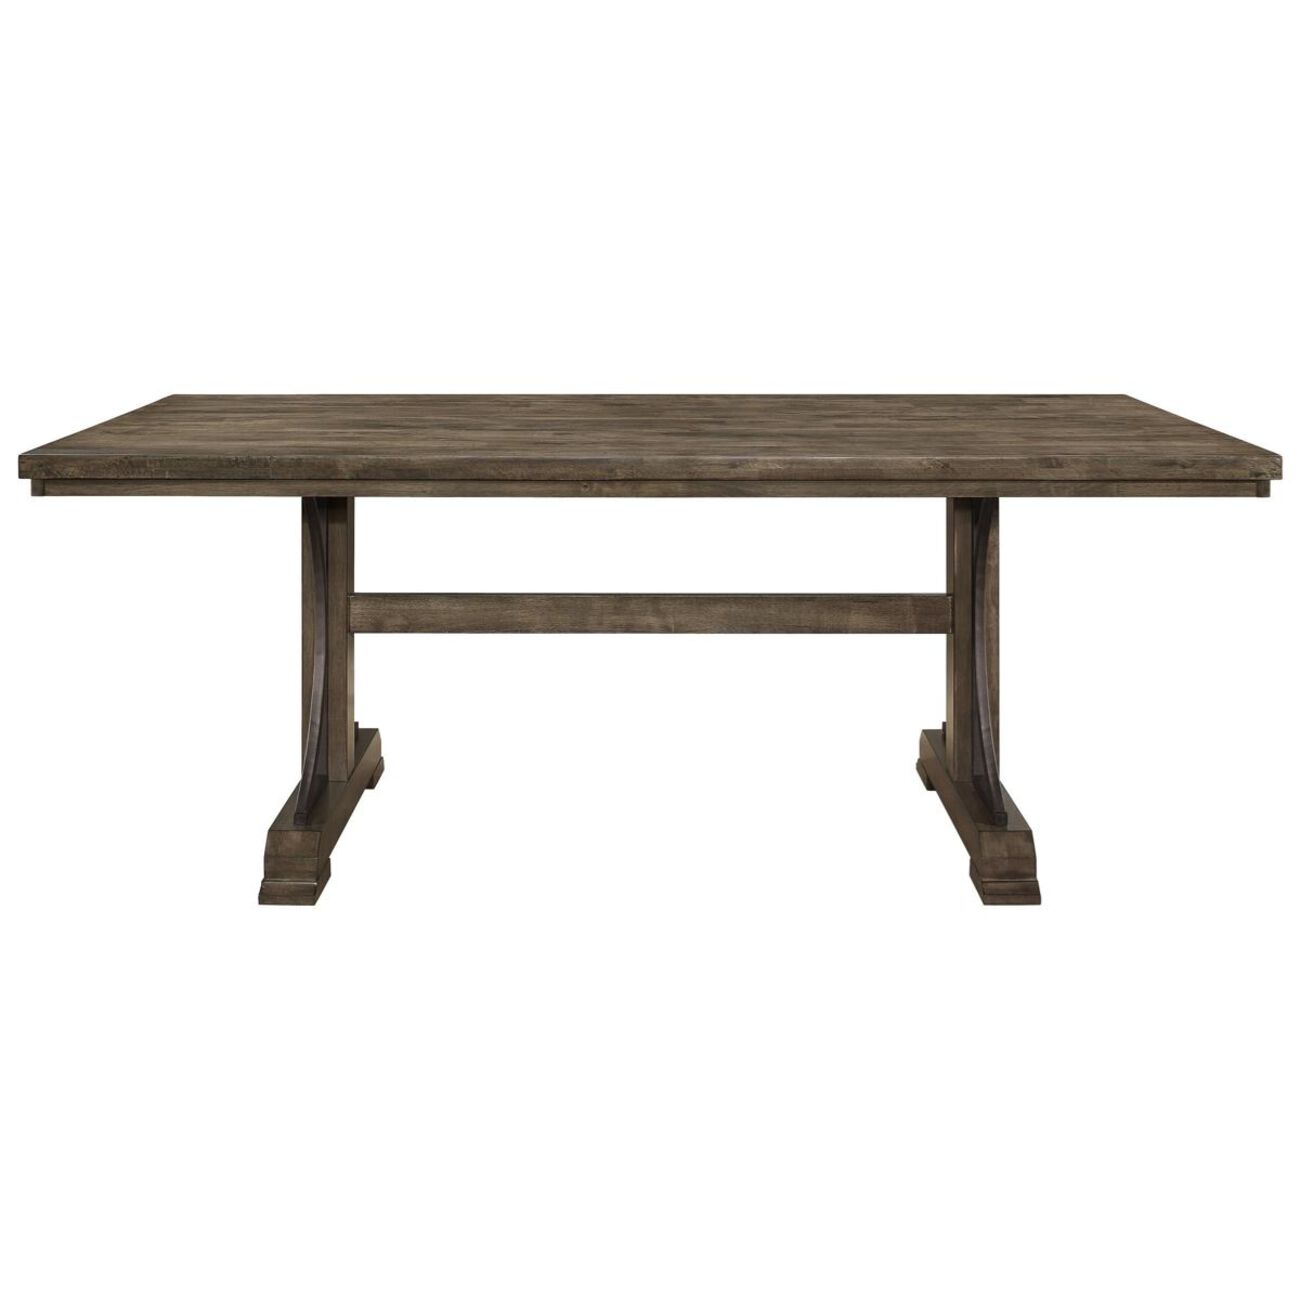 Wooden Dining Table with Trestle Base and Plank Design, Brown